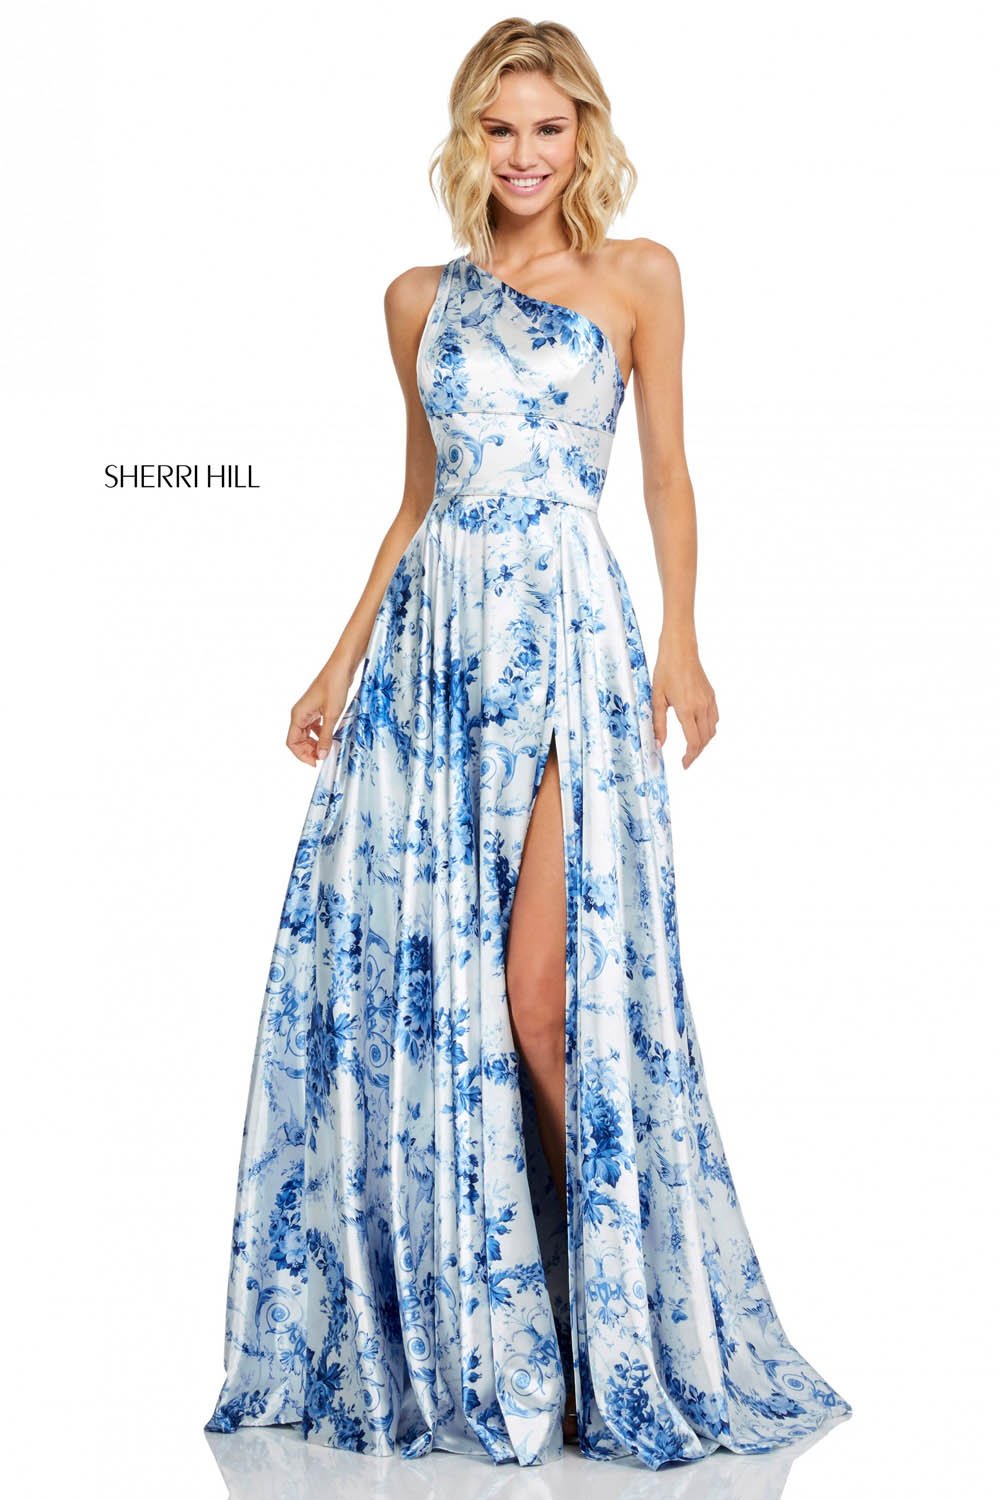 Sherri Hill 52900 dress images in these colors: Blue Ivory Print.